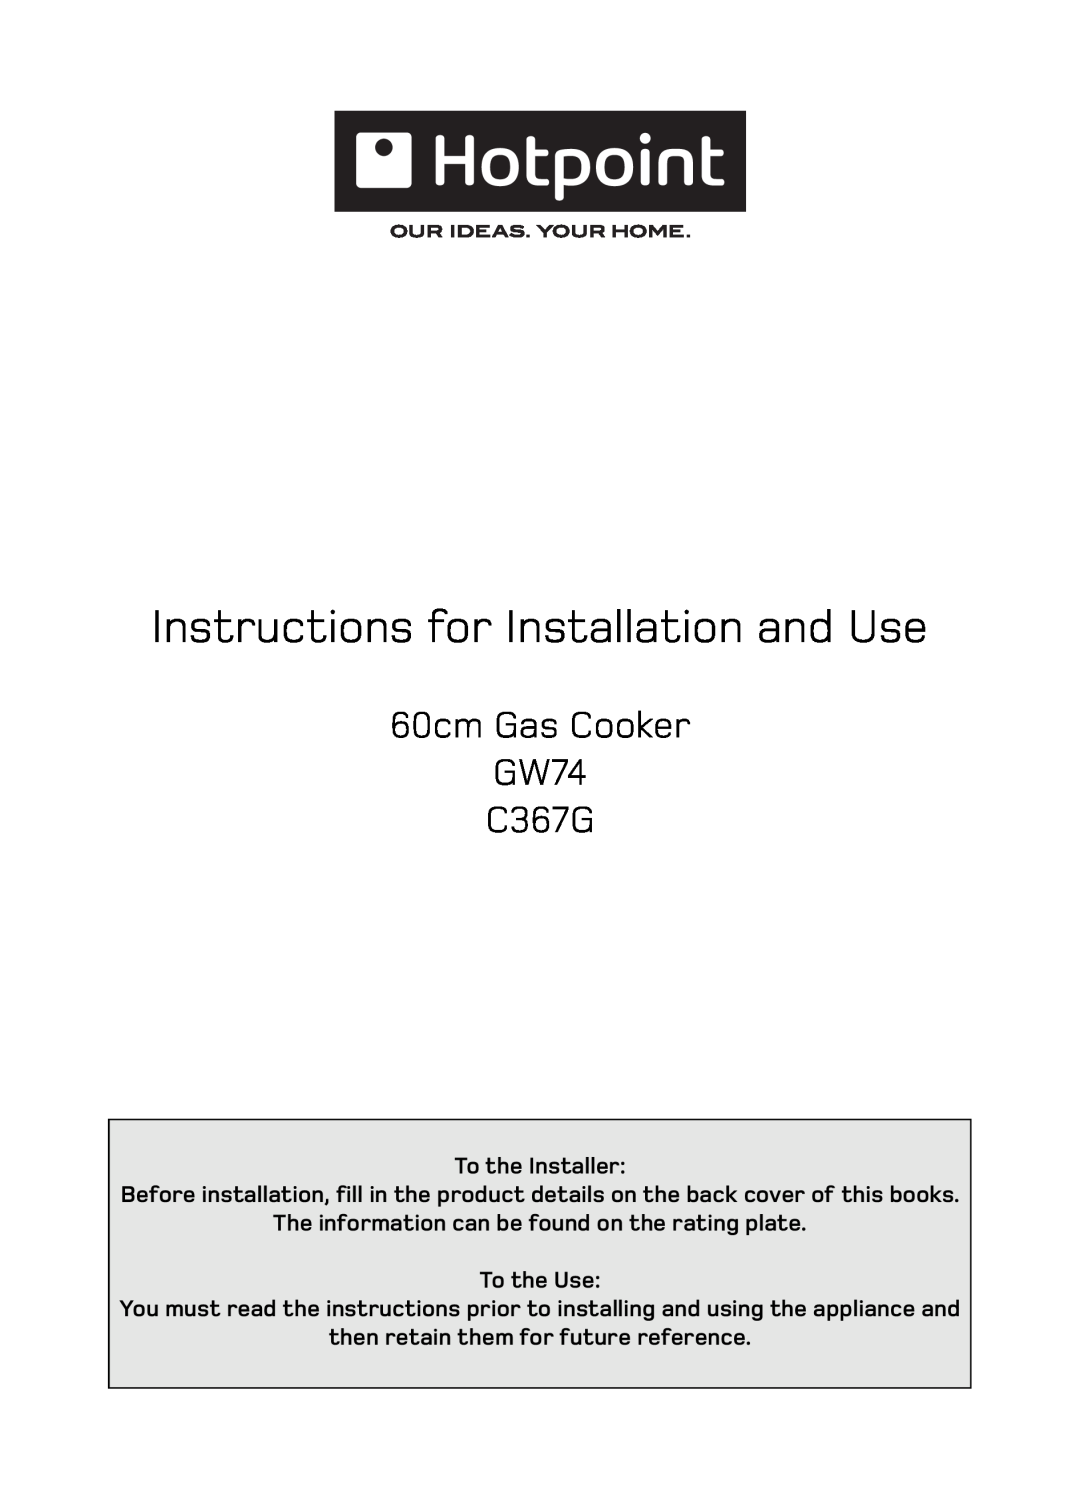 Hotpoint GW74 manual To the Installer, The information can be found on the rating plate, To the Use 